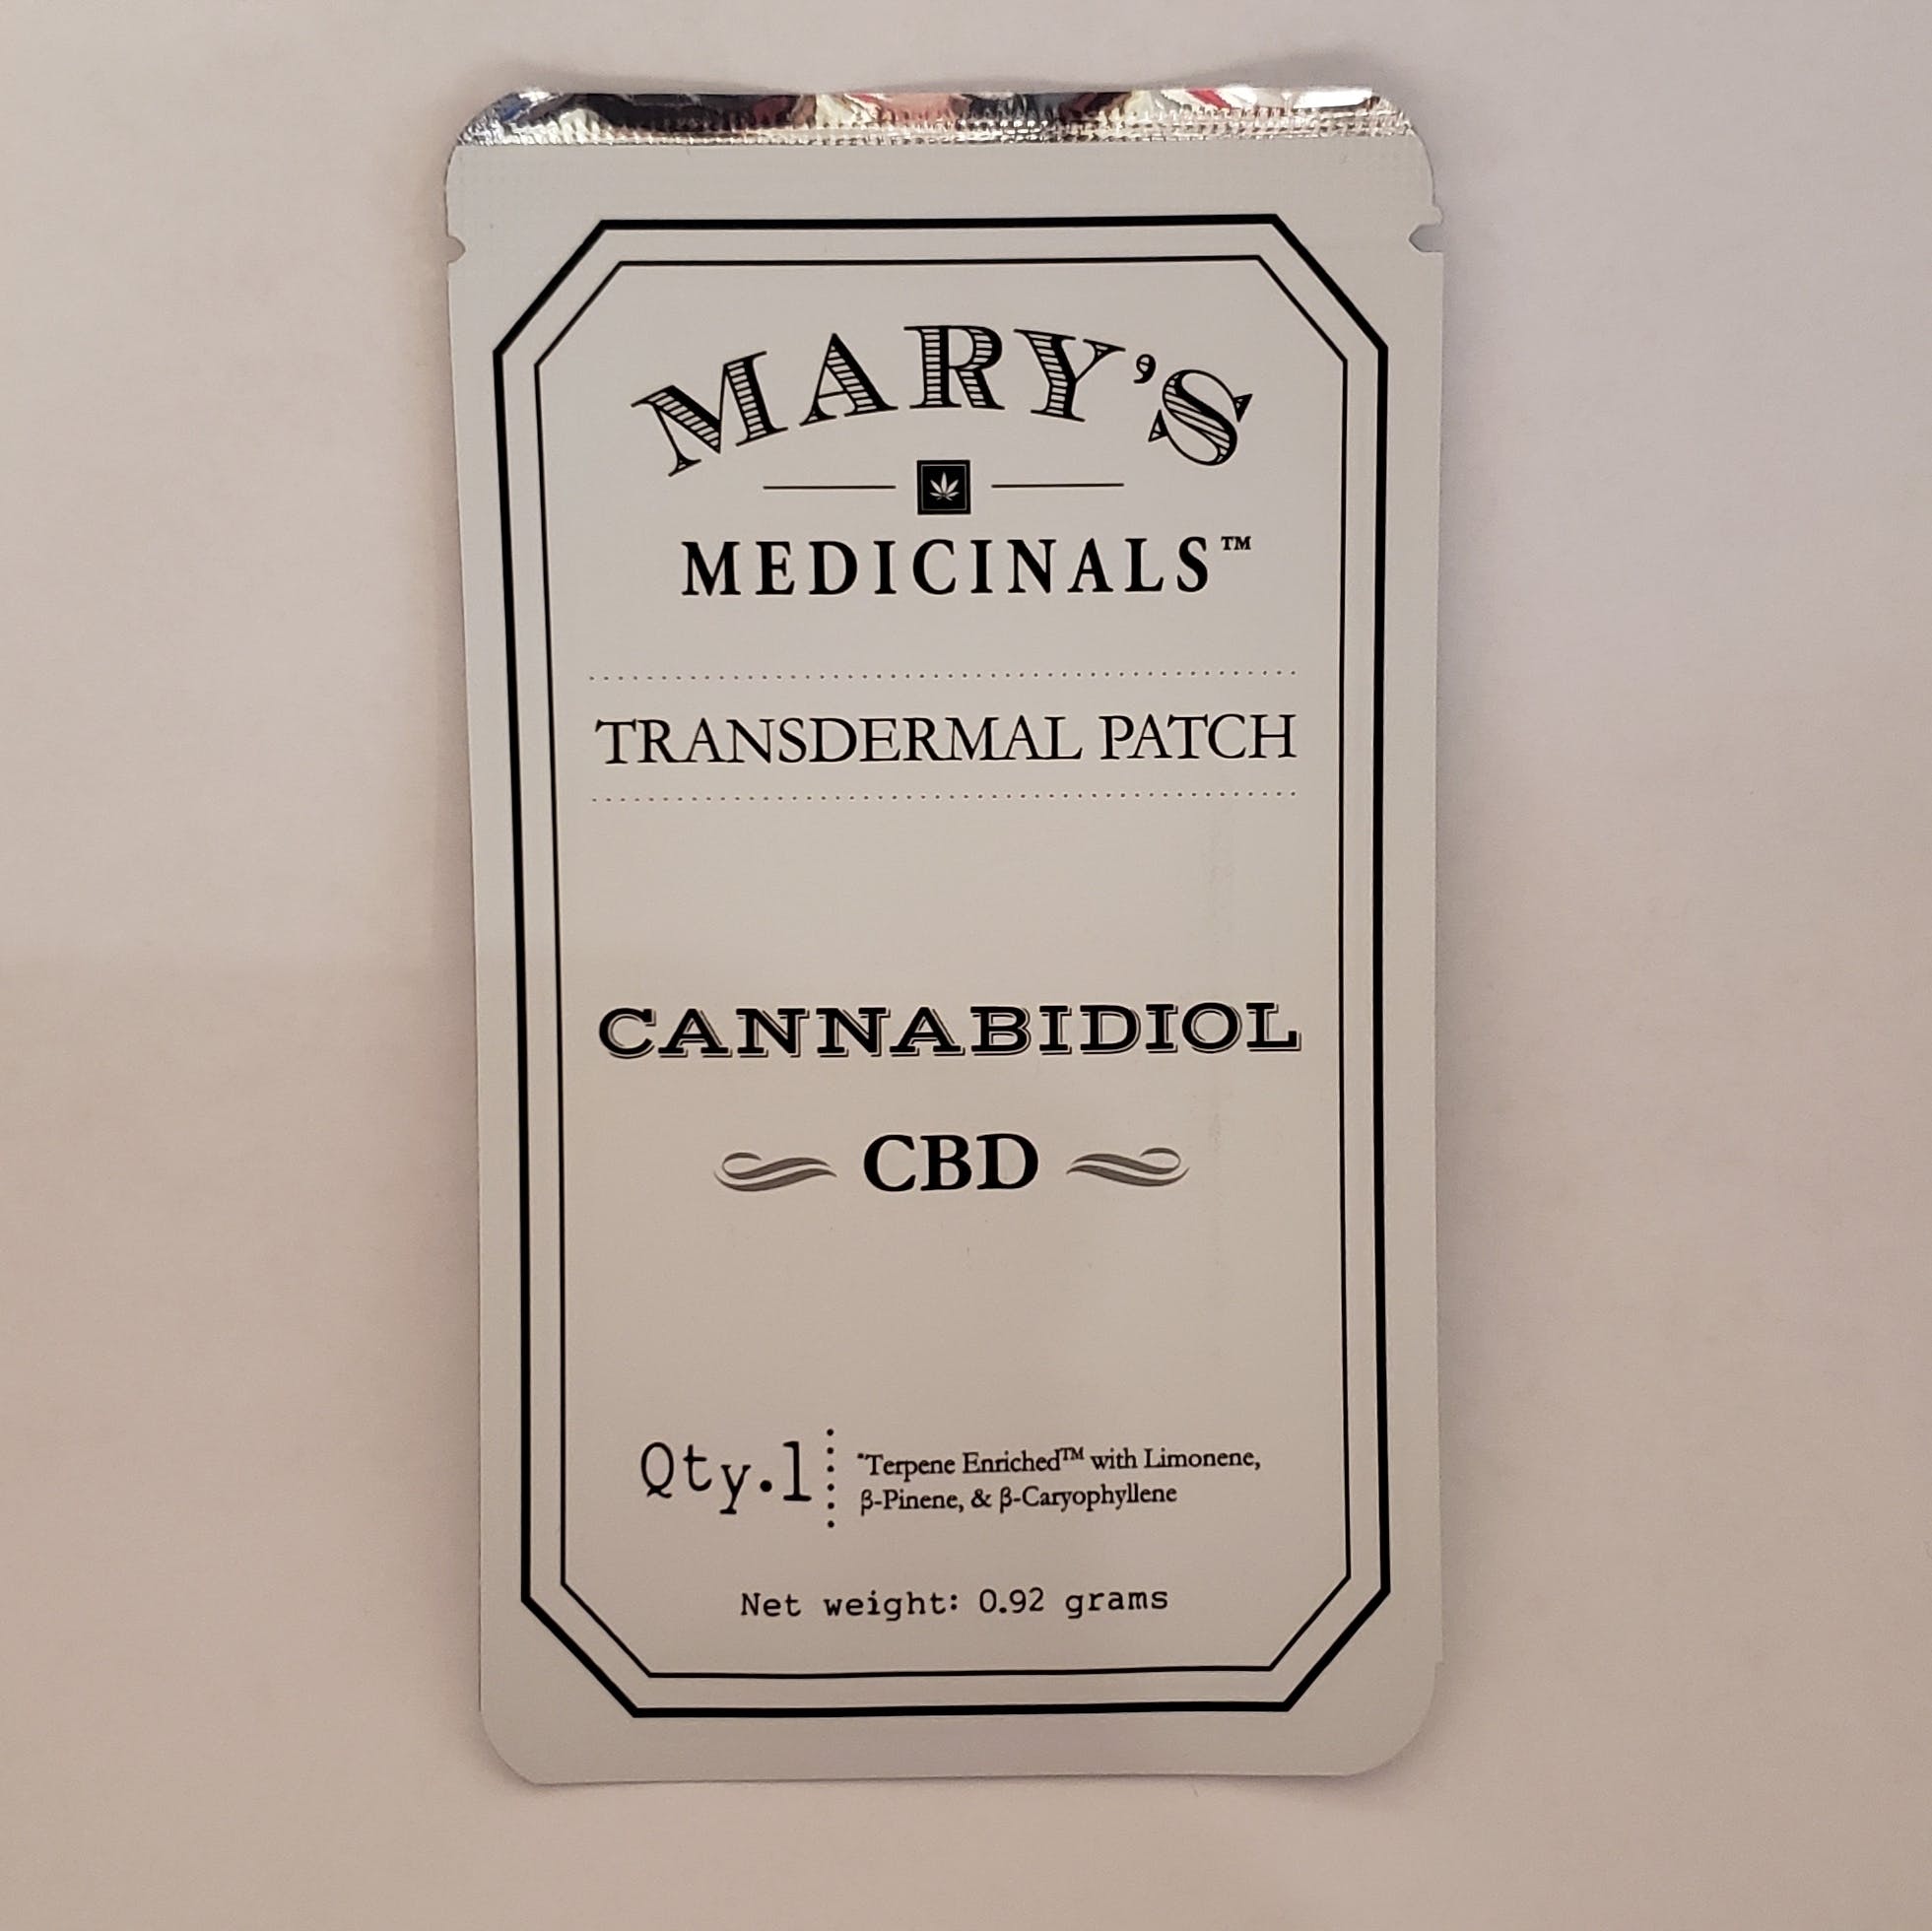 marijuana-dispensaries-mission-wheaton-newly-opened-in-silver-spring-marys-medicinals-cbd-10mg-patch